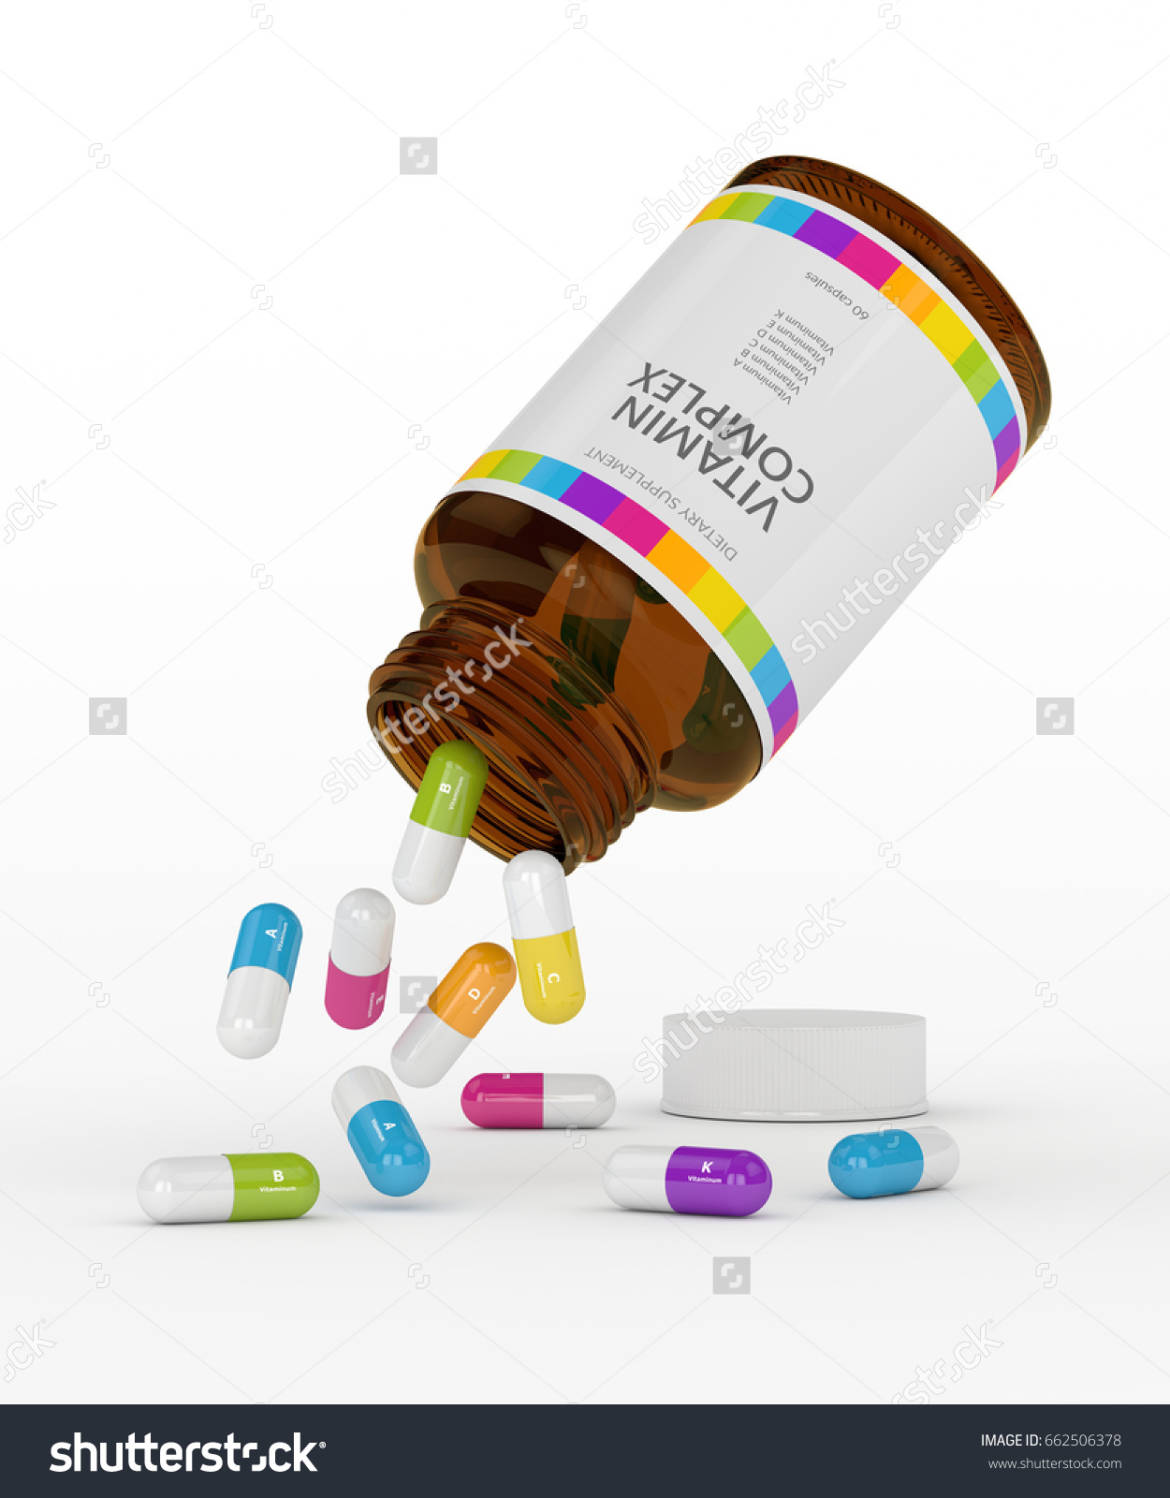 stock-photo-d-rendering-of-vitamin-pills-with-bottle-concept-of-dietary-supplements-662506378.jpg